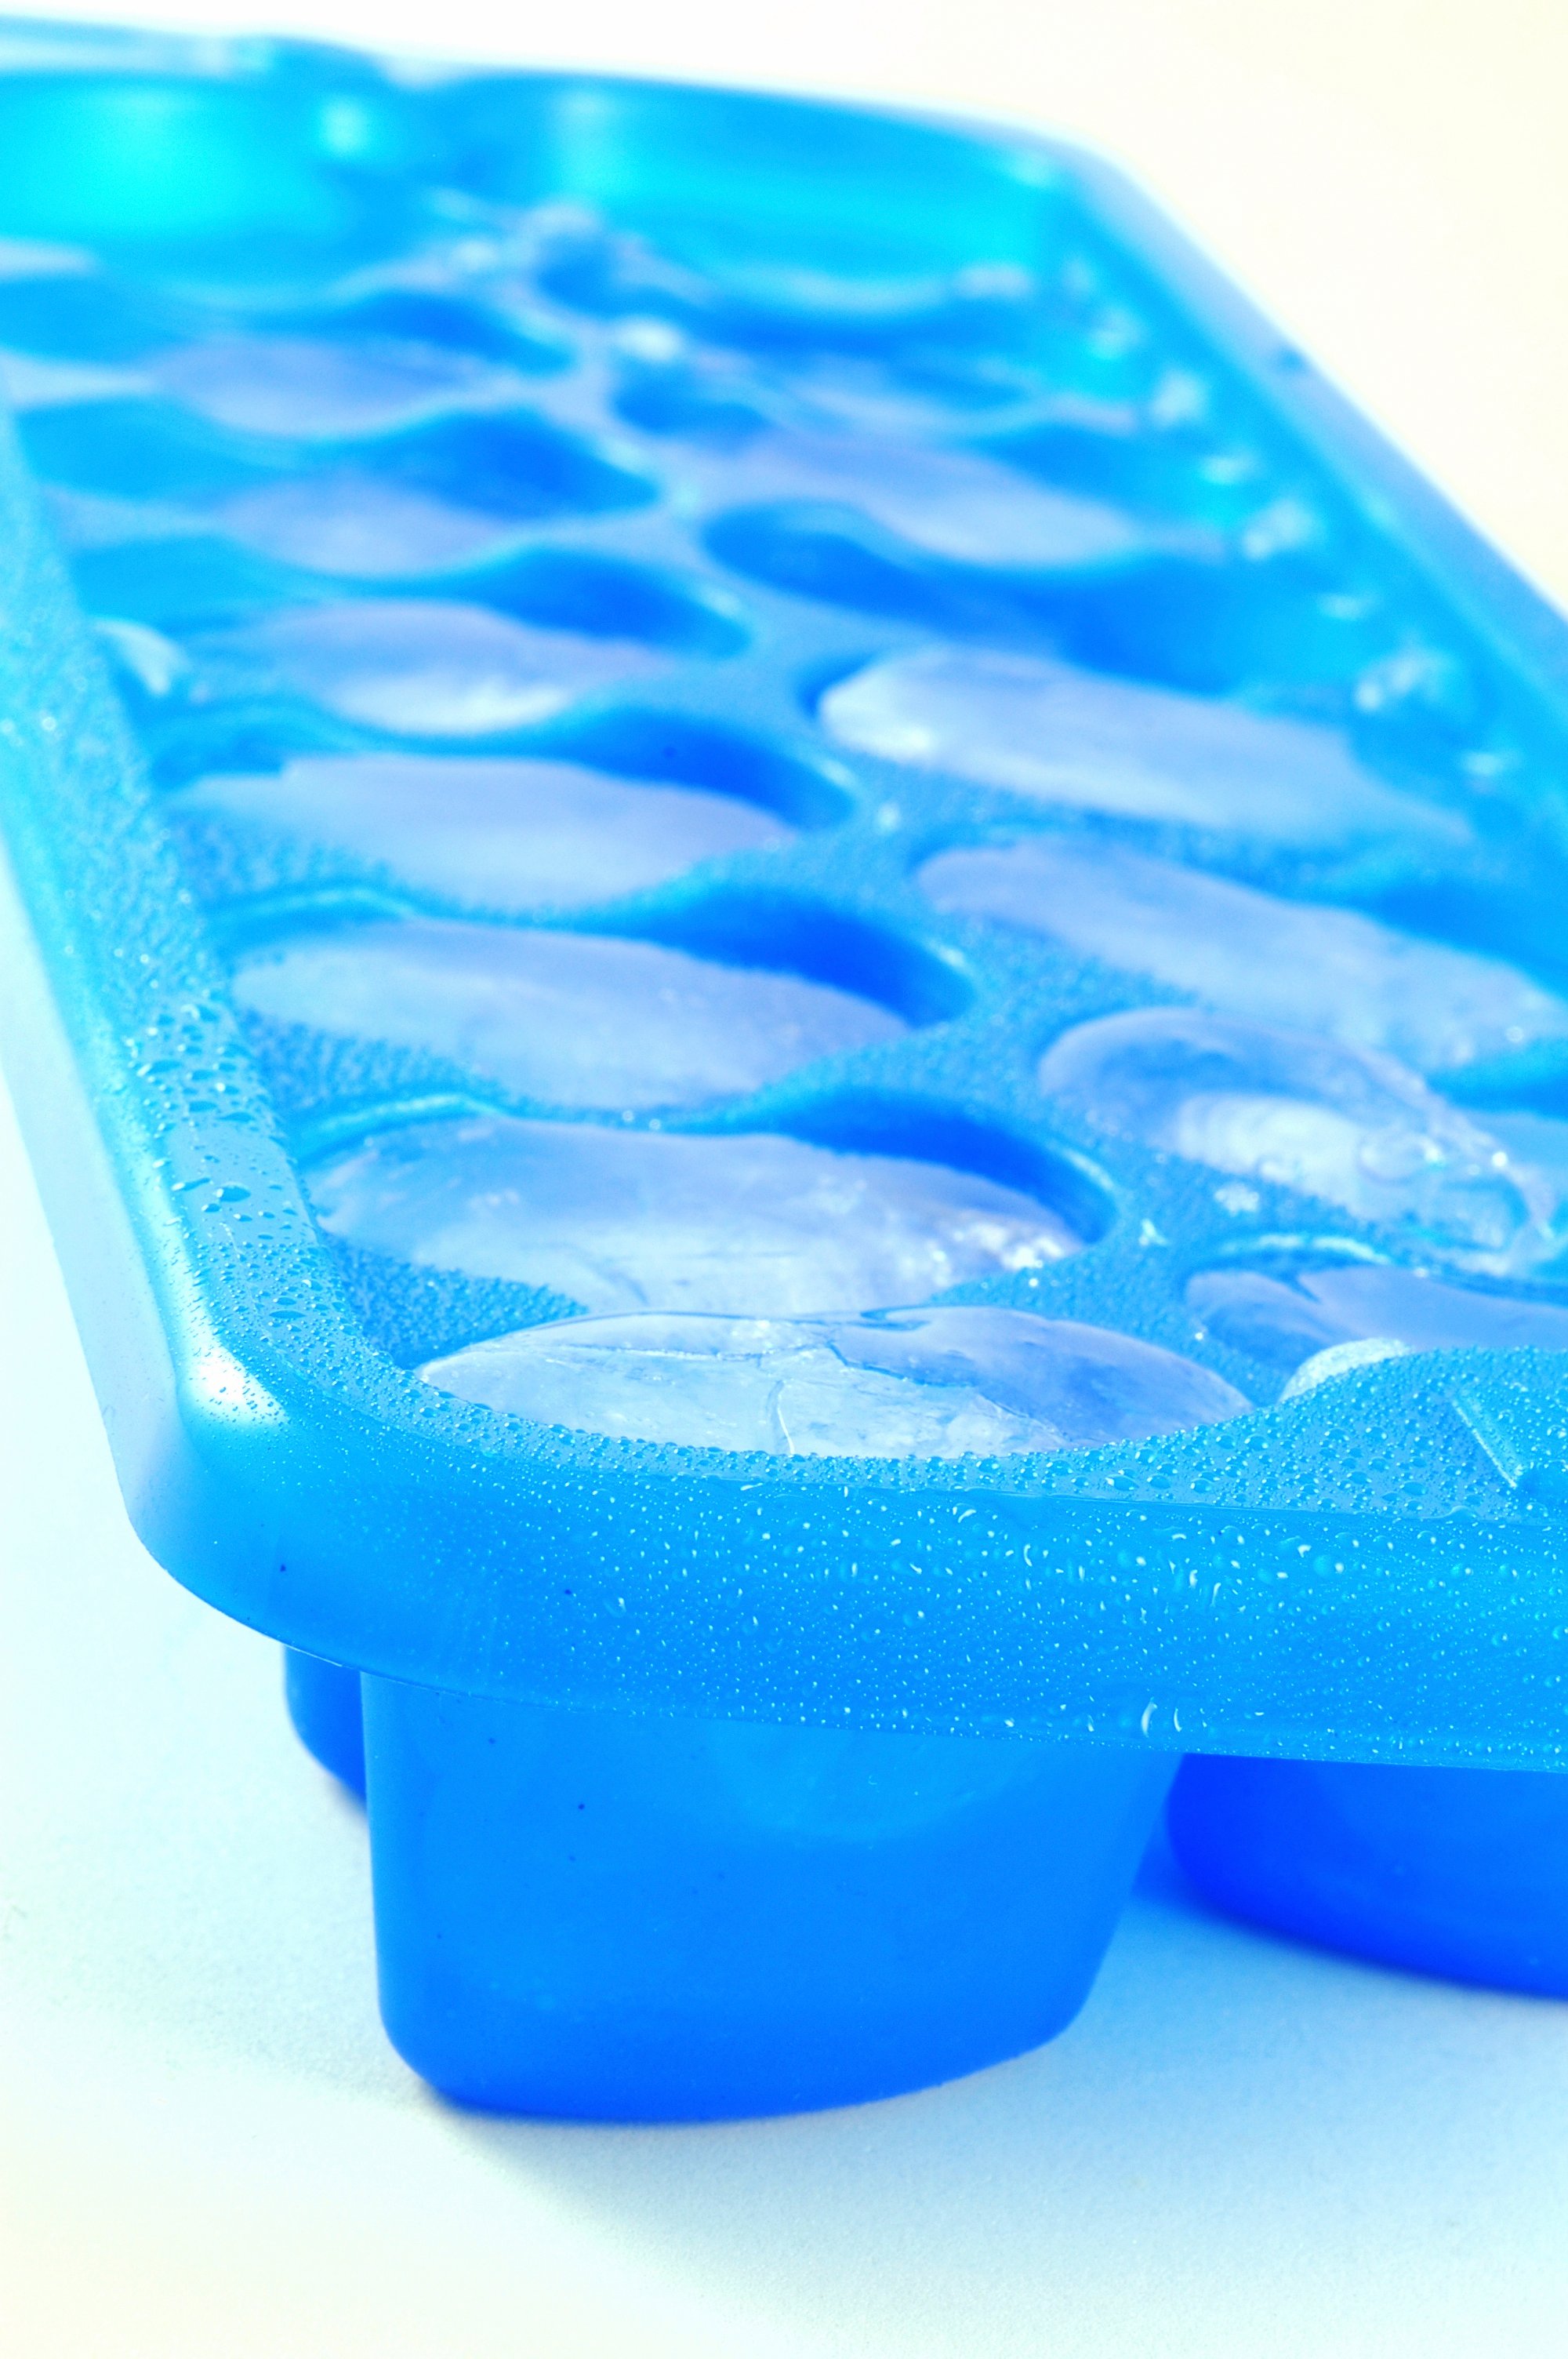 8 Ways to Use an Ice Cube Tray (Even When You Don’t Need Ice)